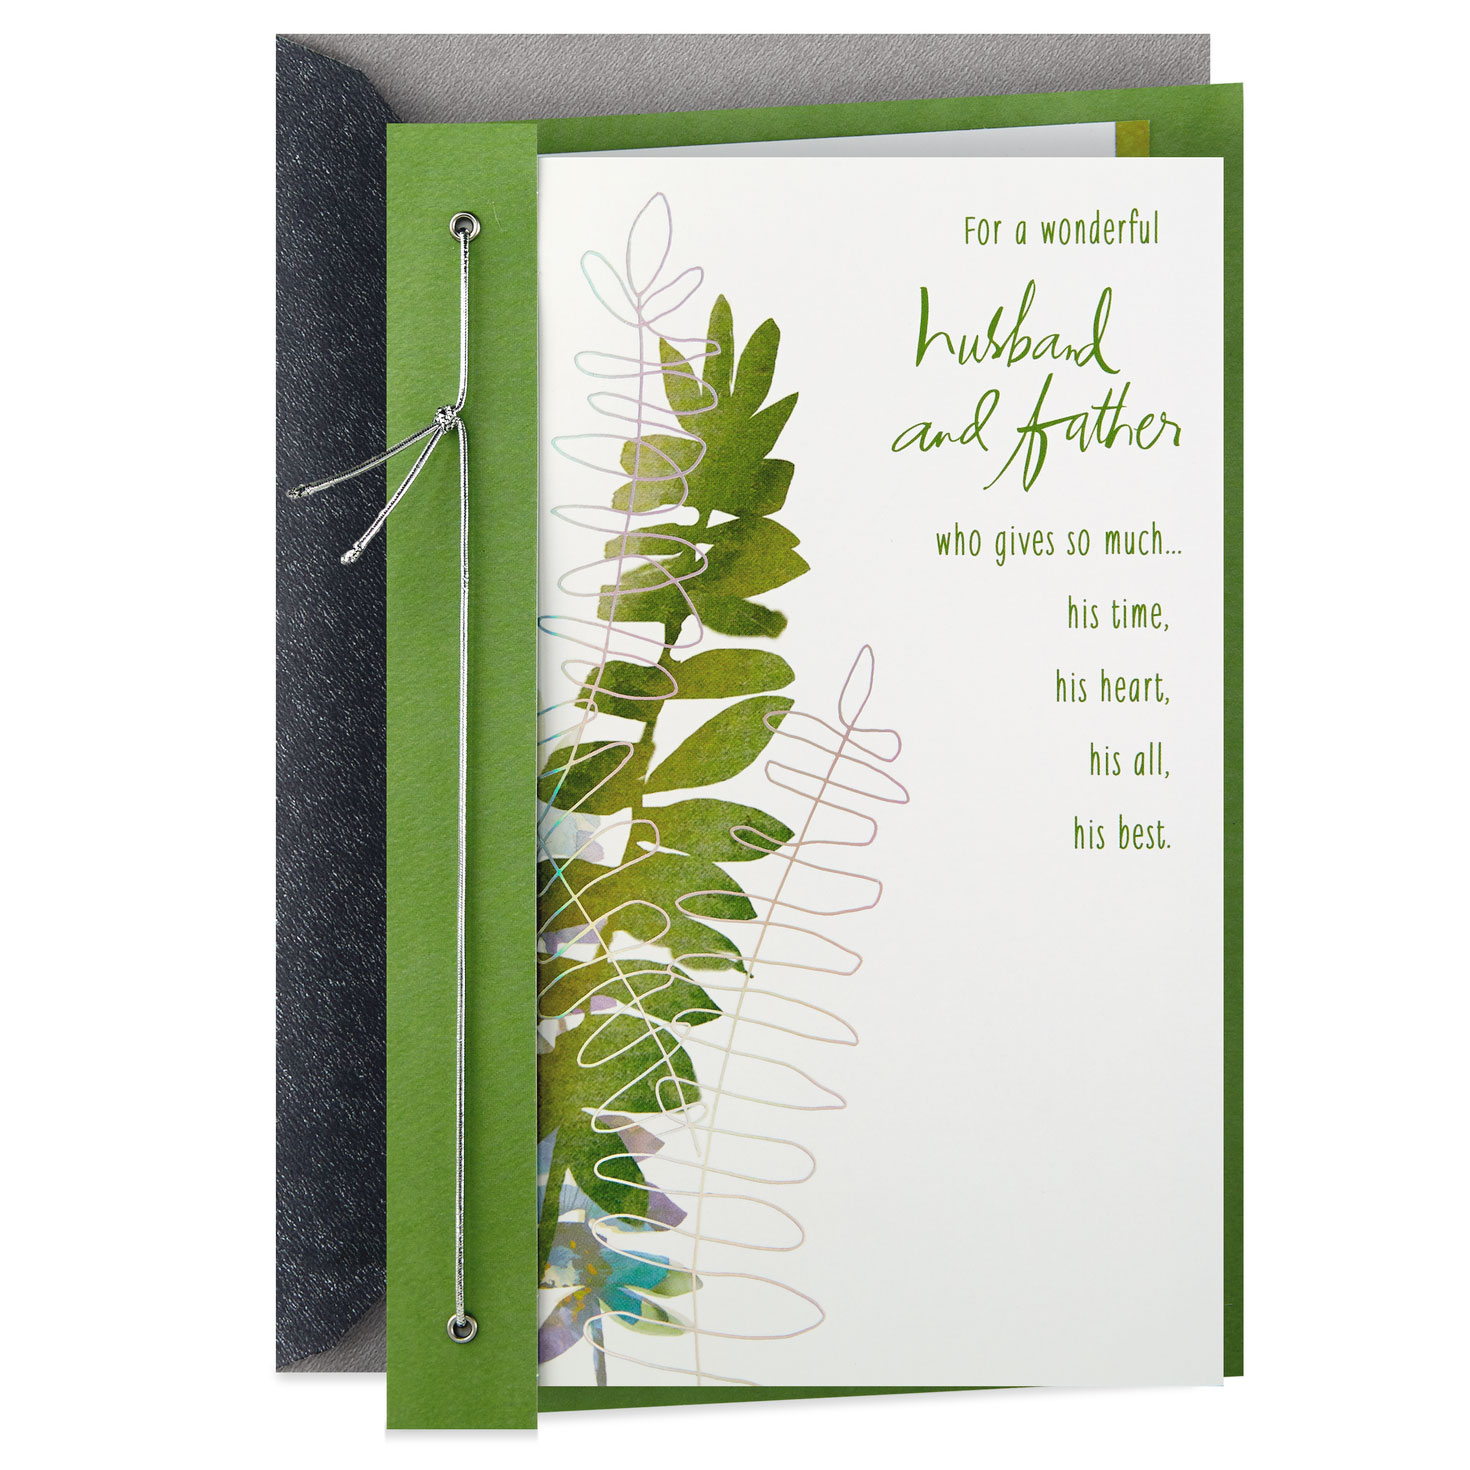 Medium Hallmark Husband Fathers Day Card Thanks for Being You